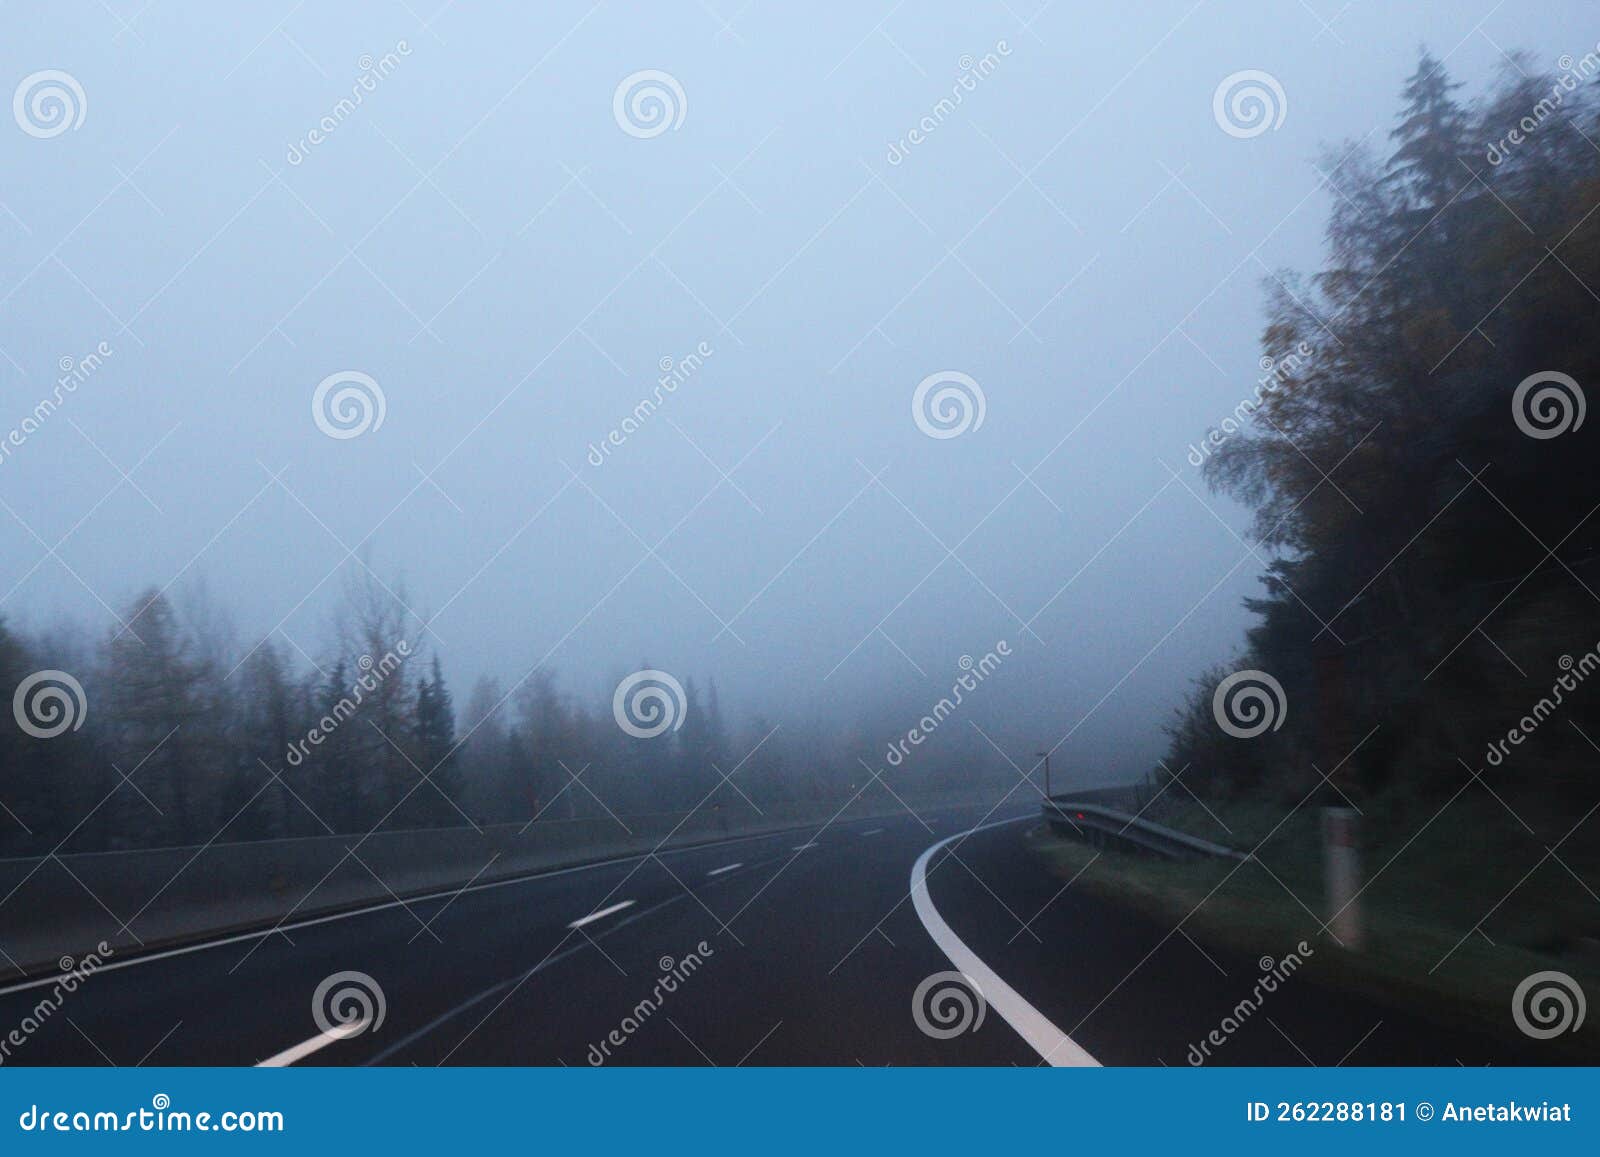 curved higway landscape with fog and forest on sides